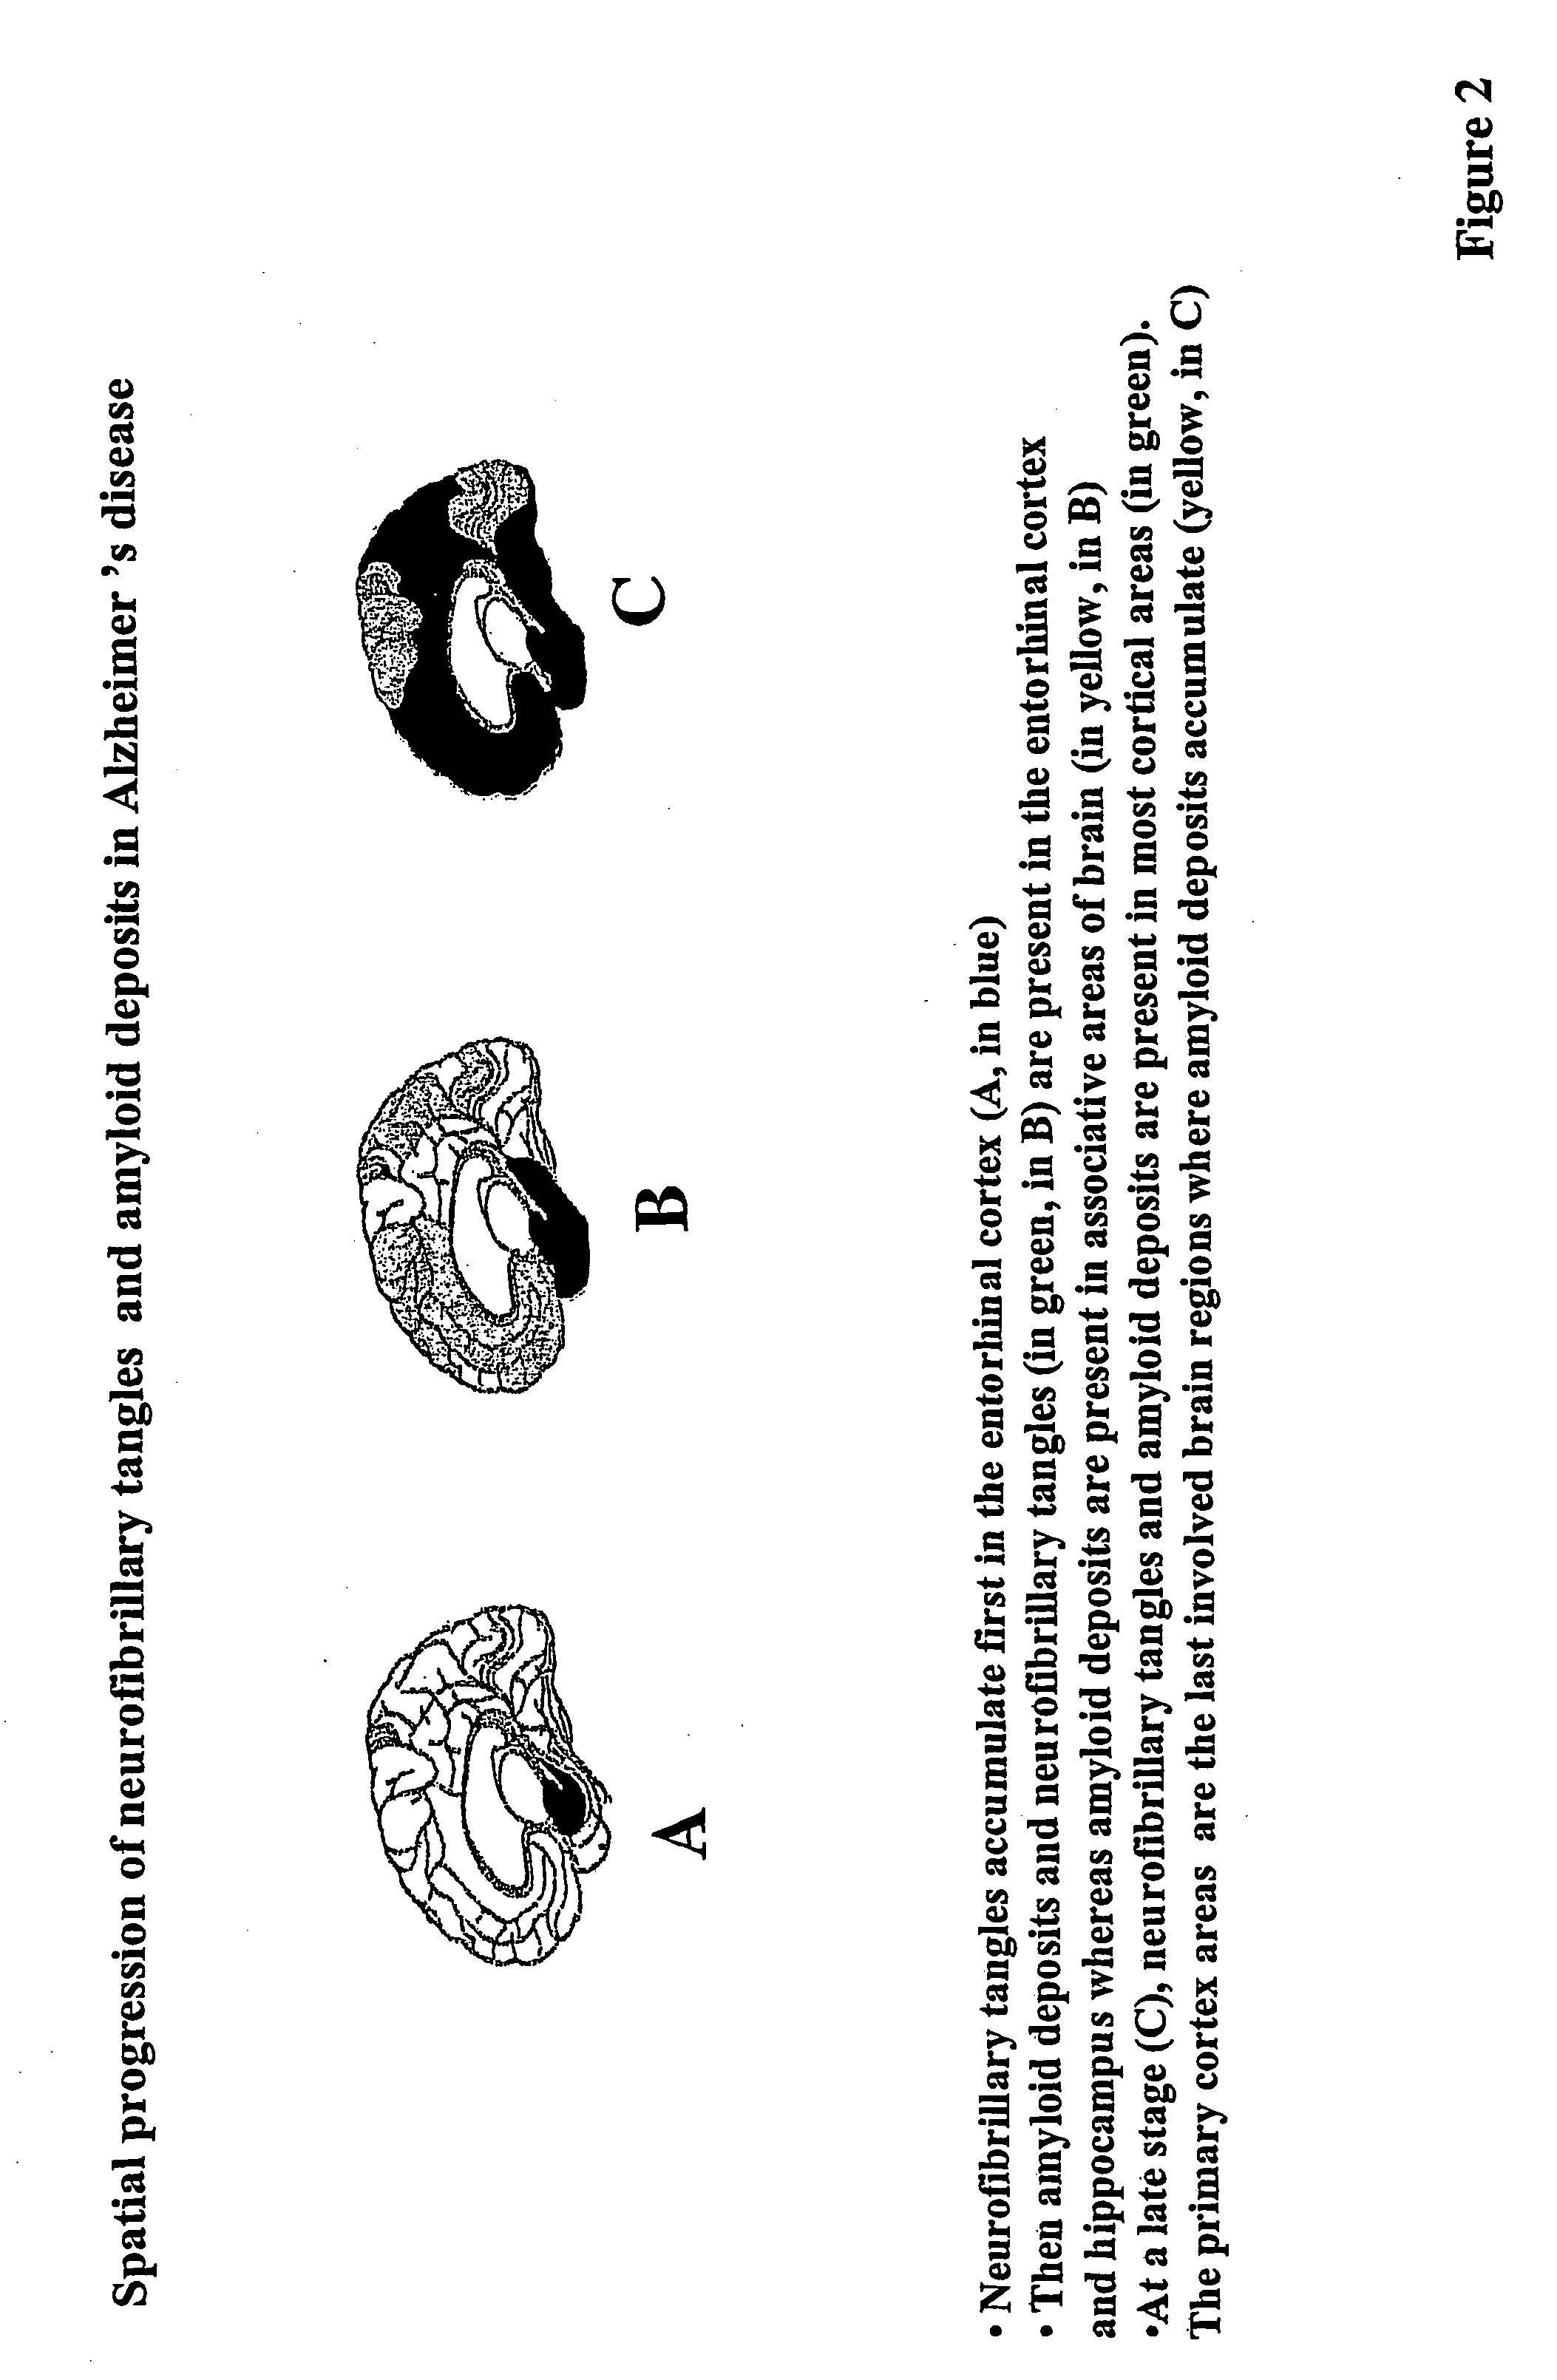 Methods of administering vectors to synaptically connected neurons